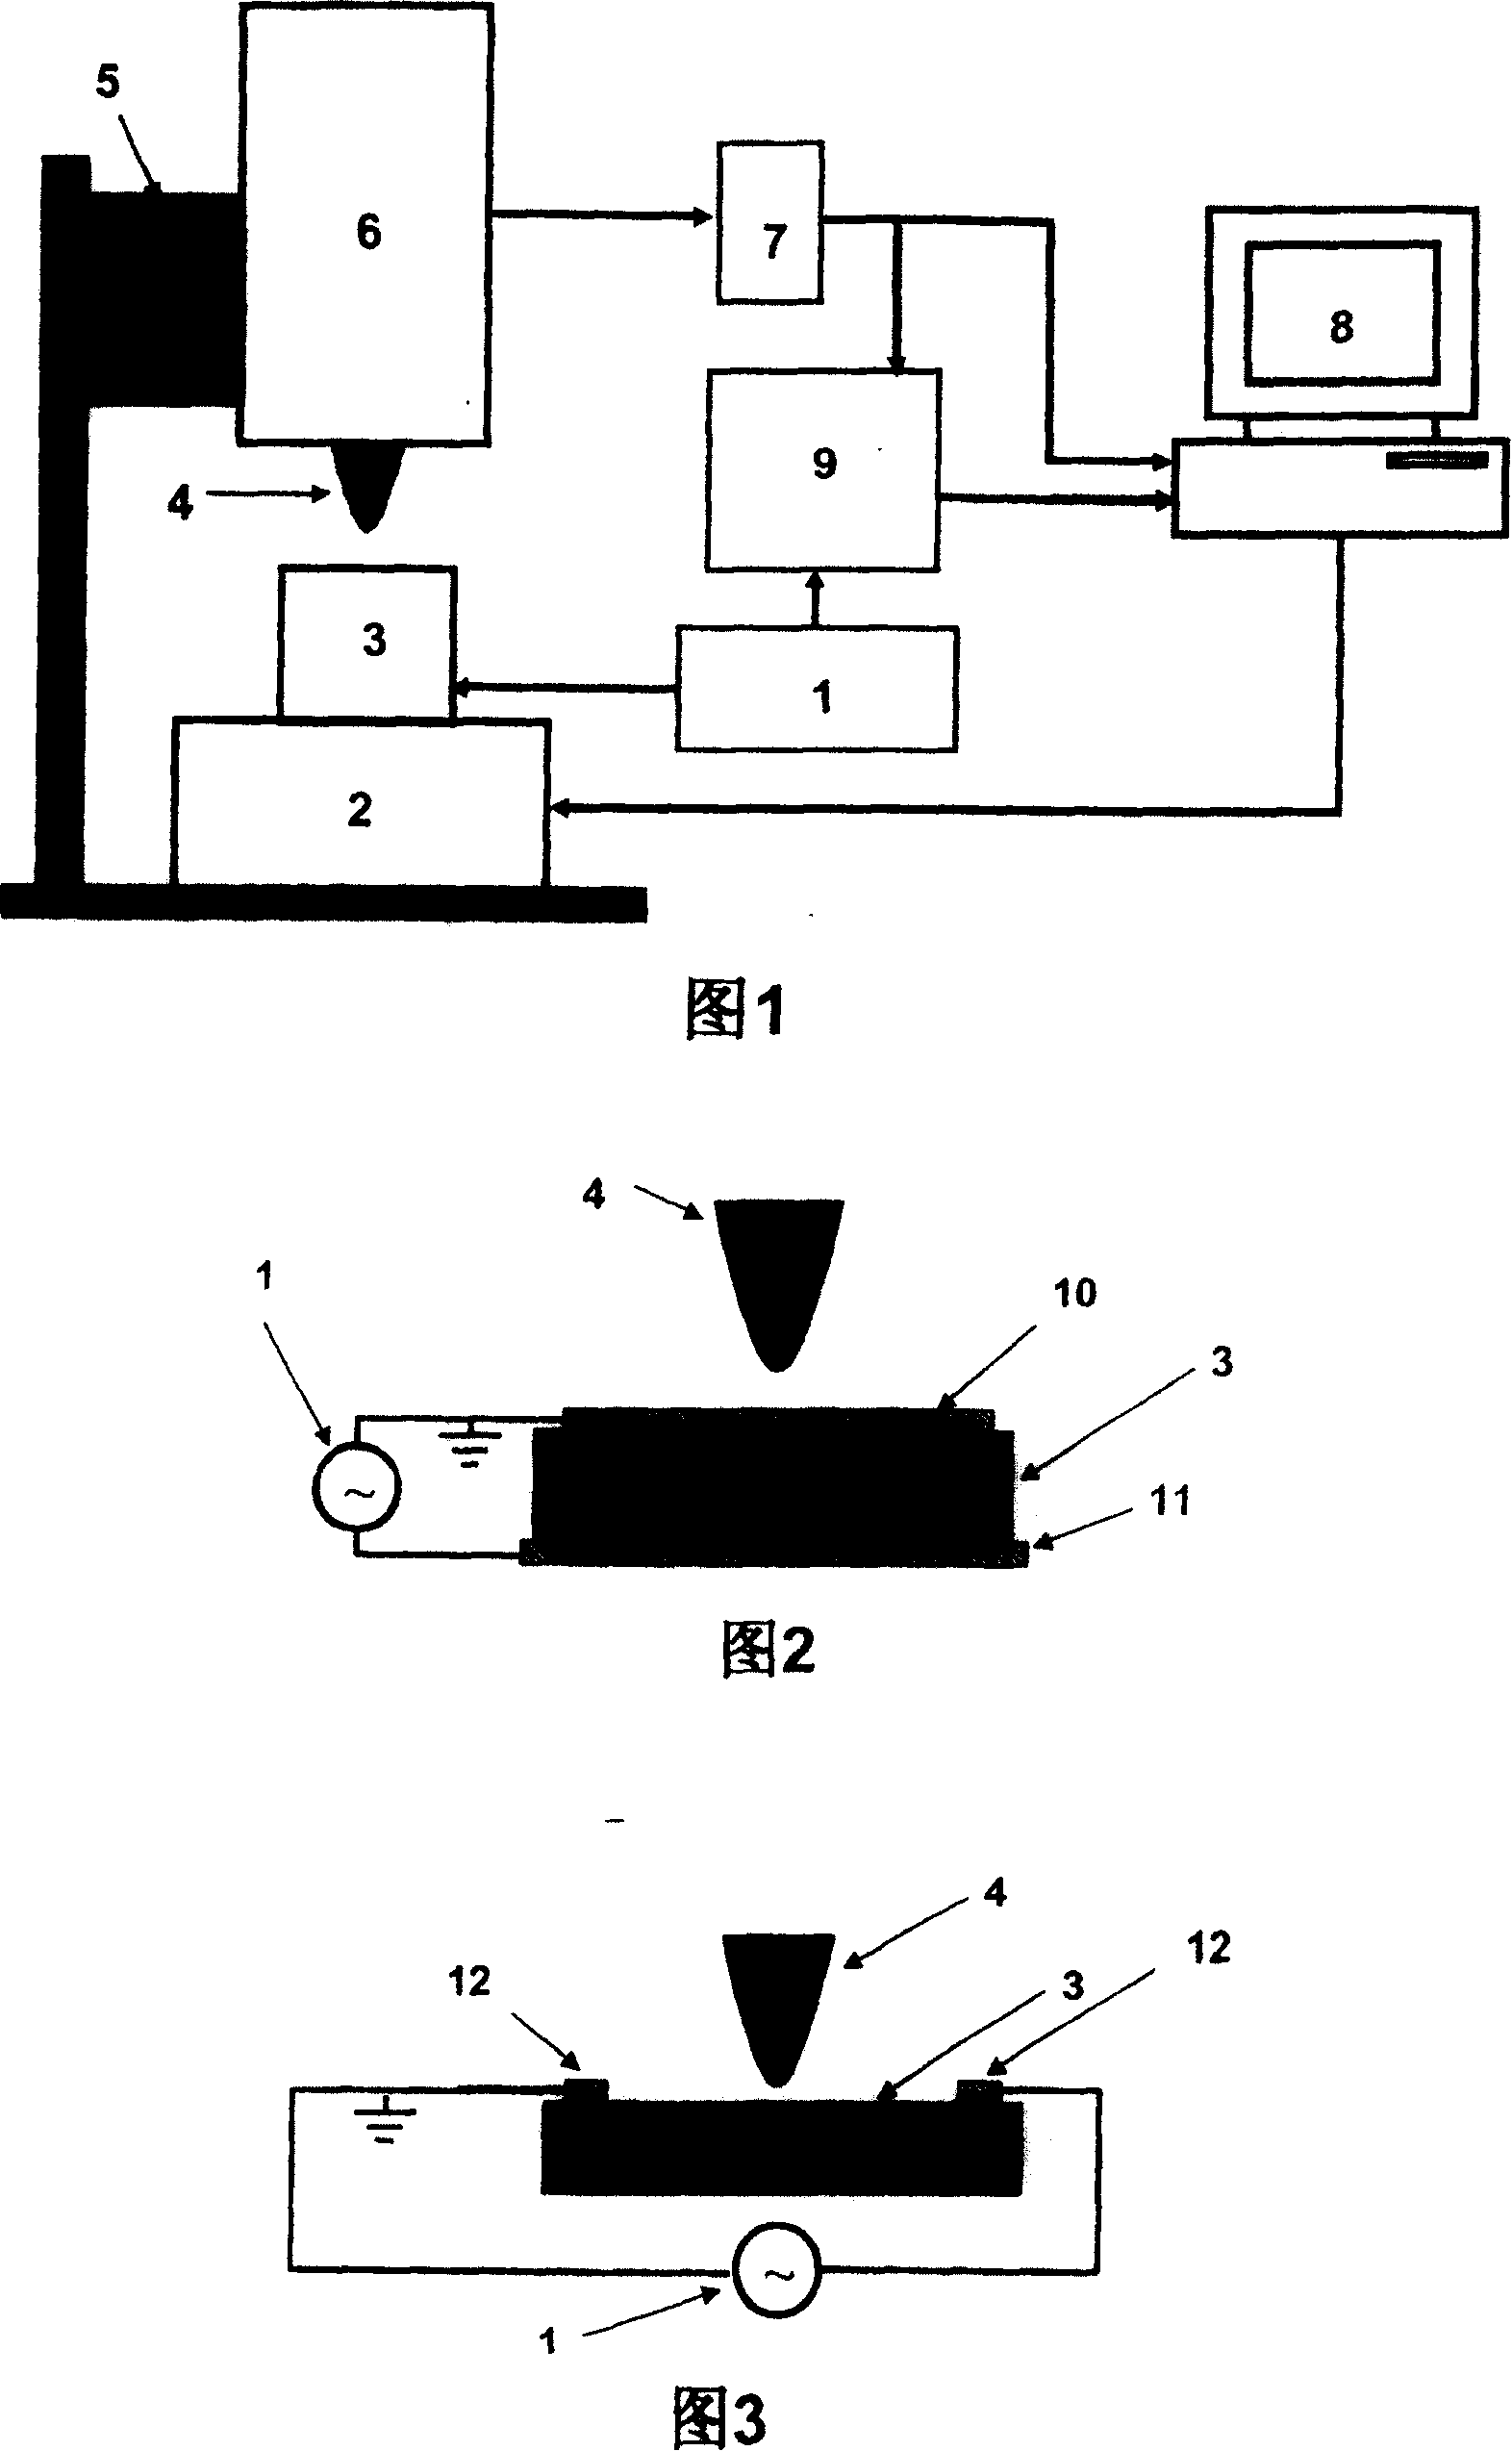 Method and apparatus for measuring material piezoelectric coefficient by using scanning near-field microwave microscopy